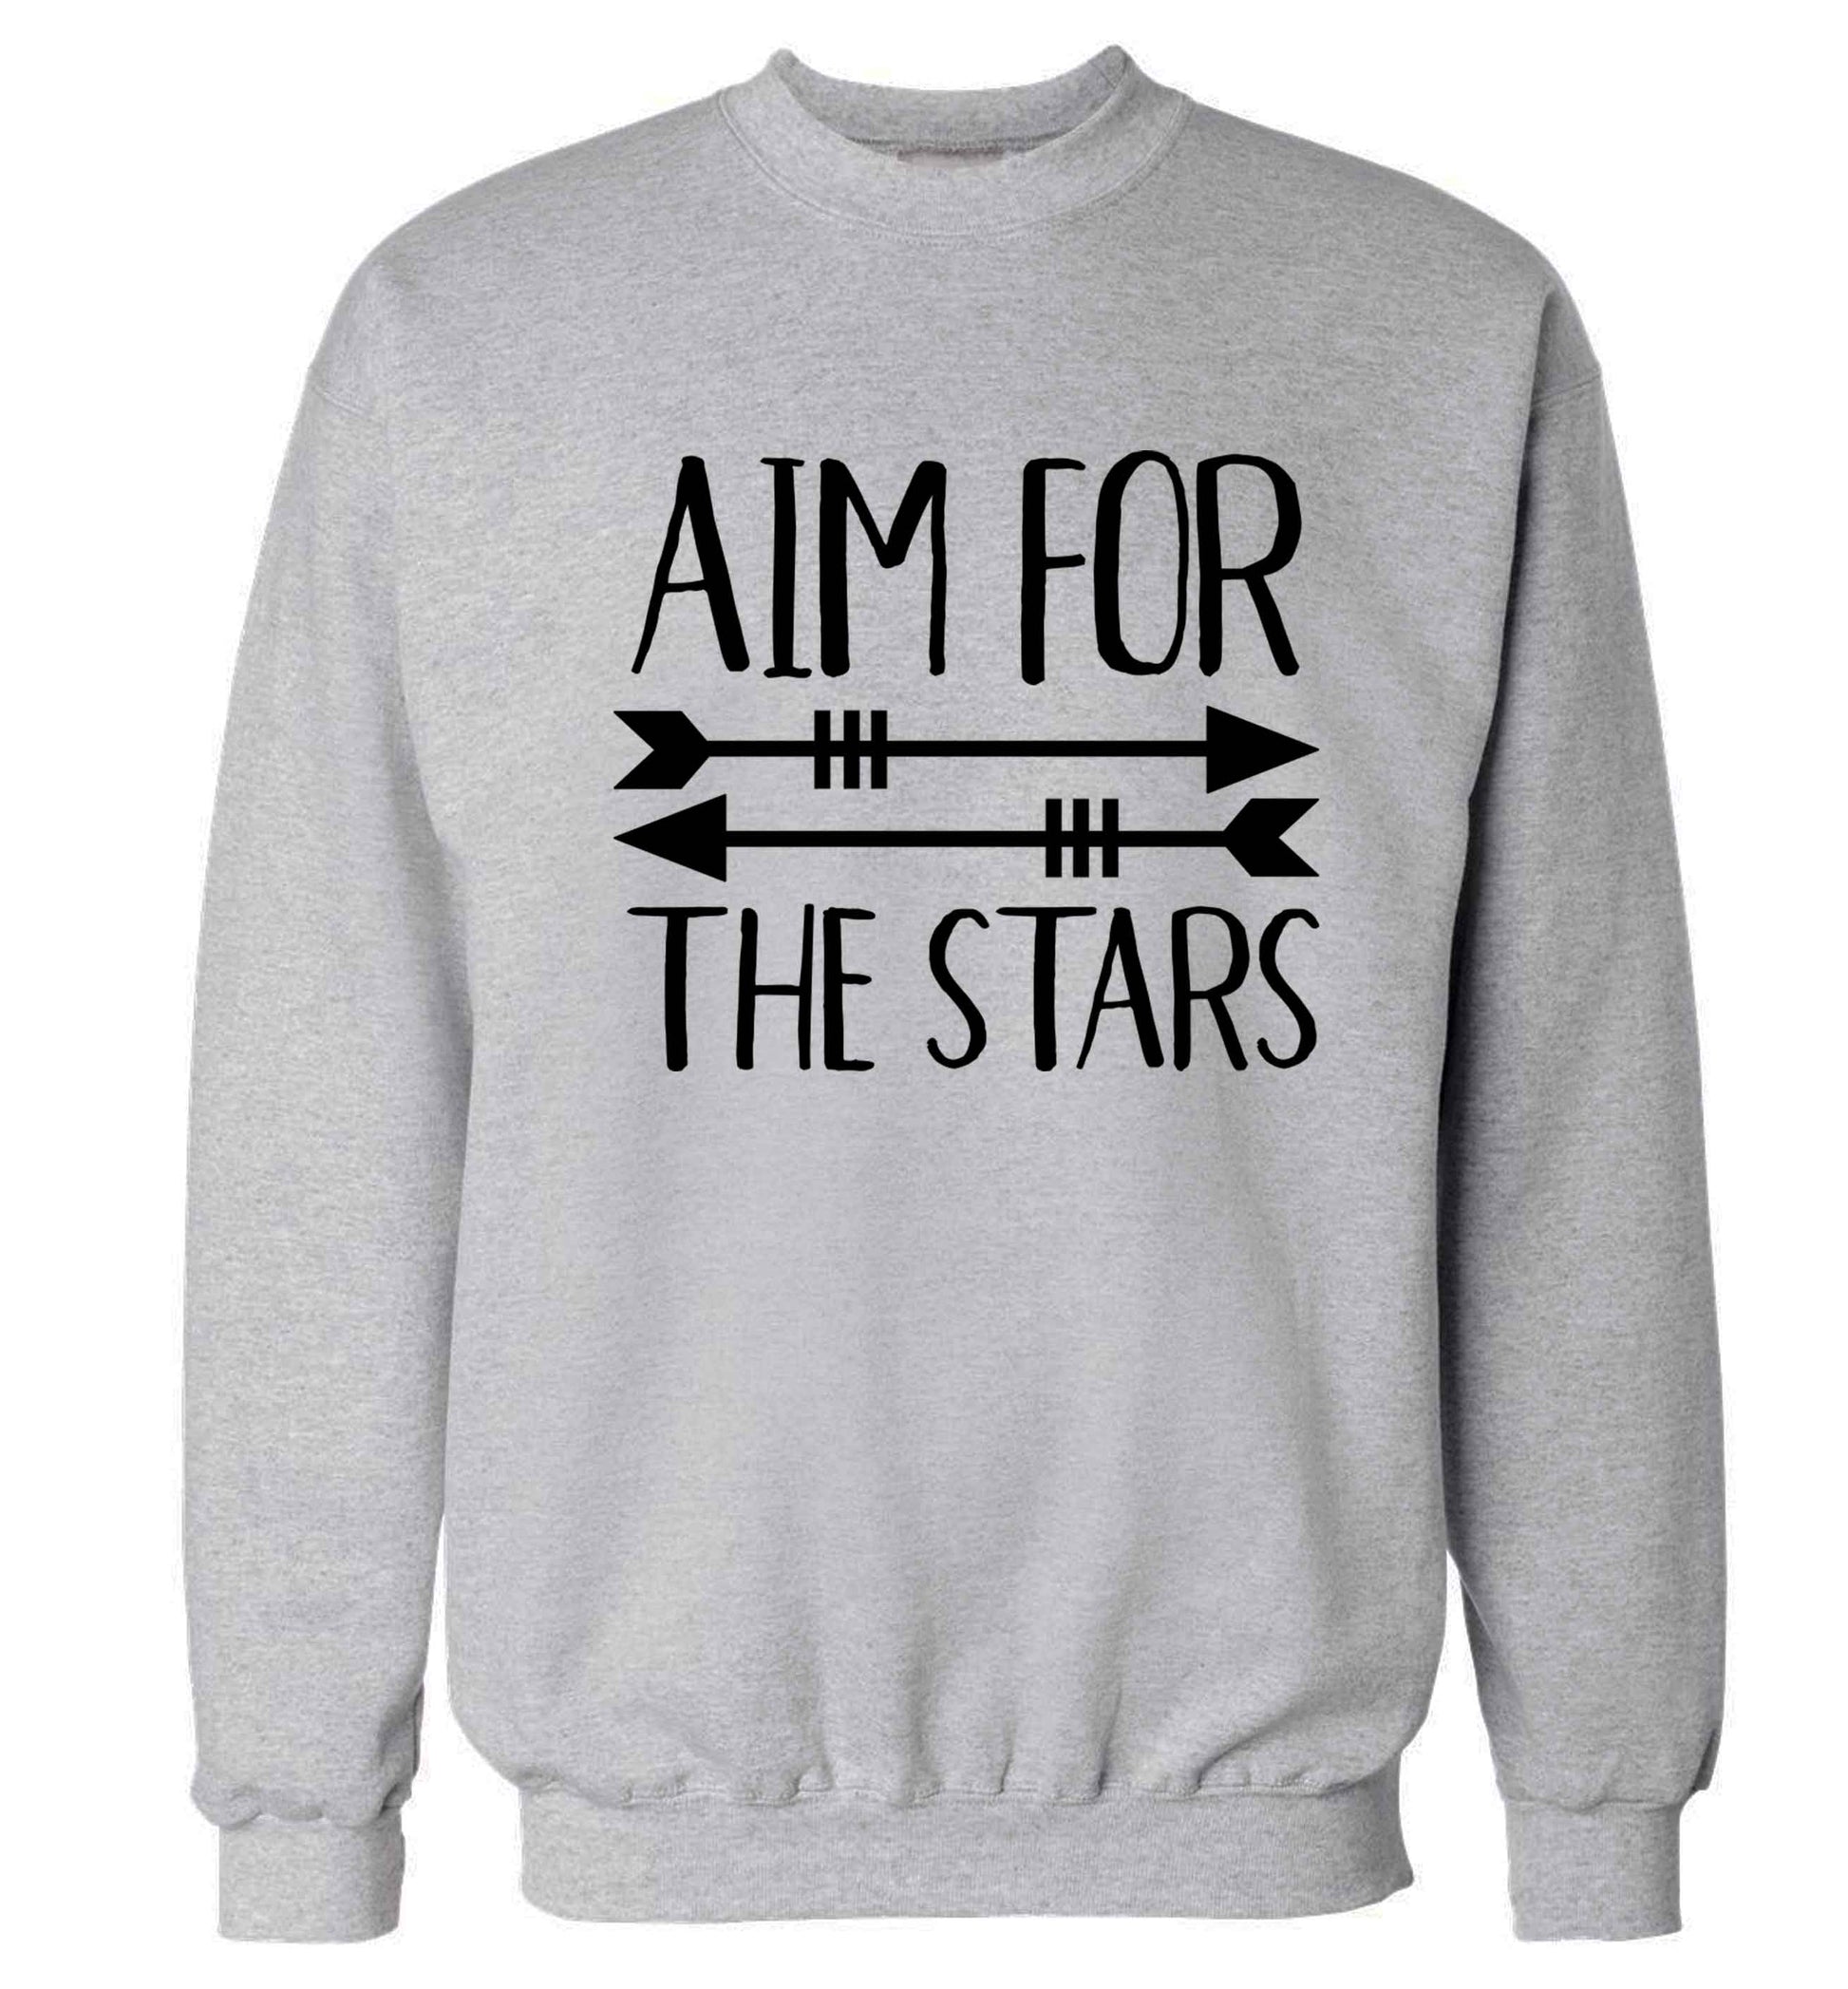 Aim for the stars Adult's unisex grey Sweater 2XL